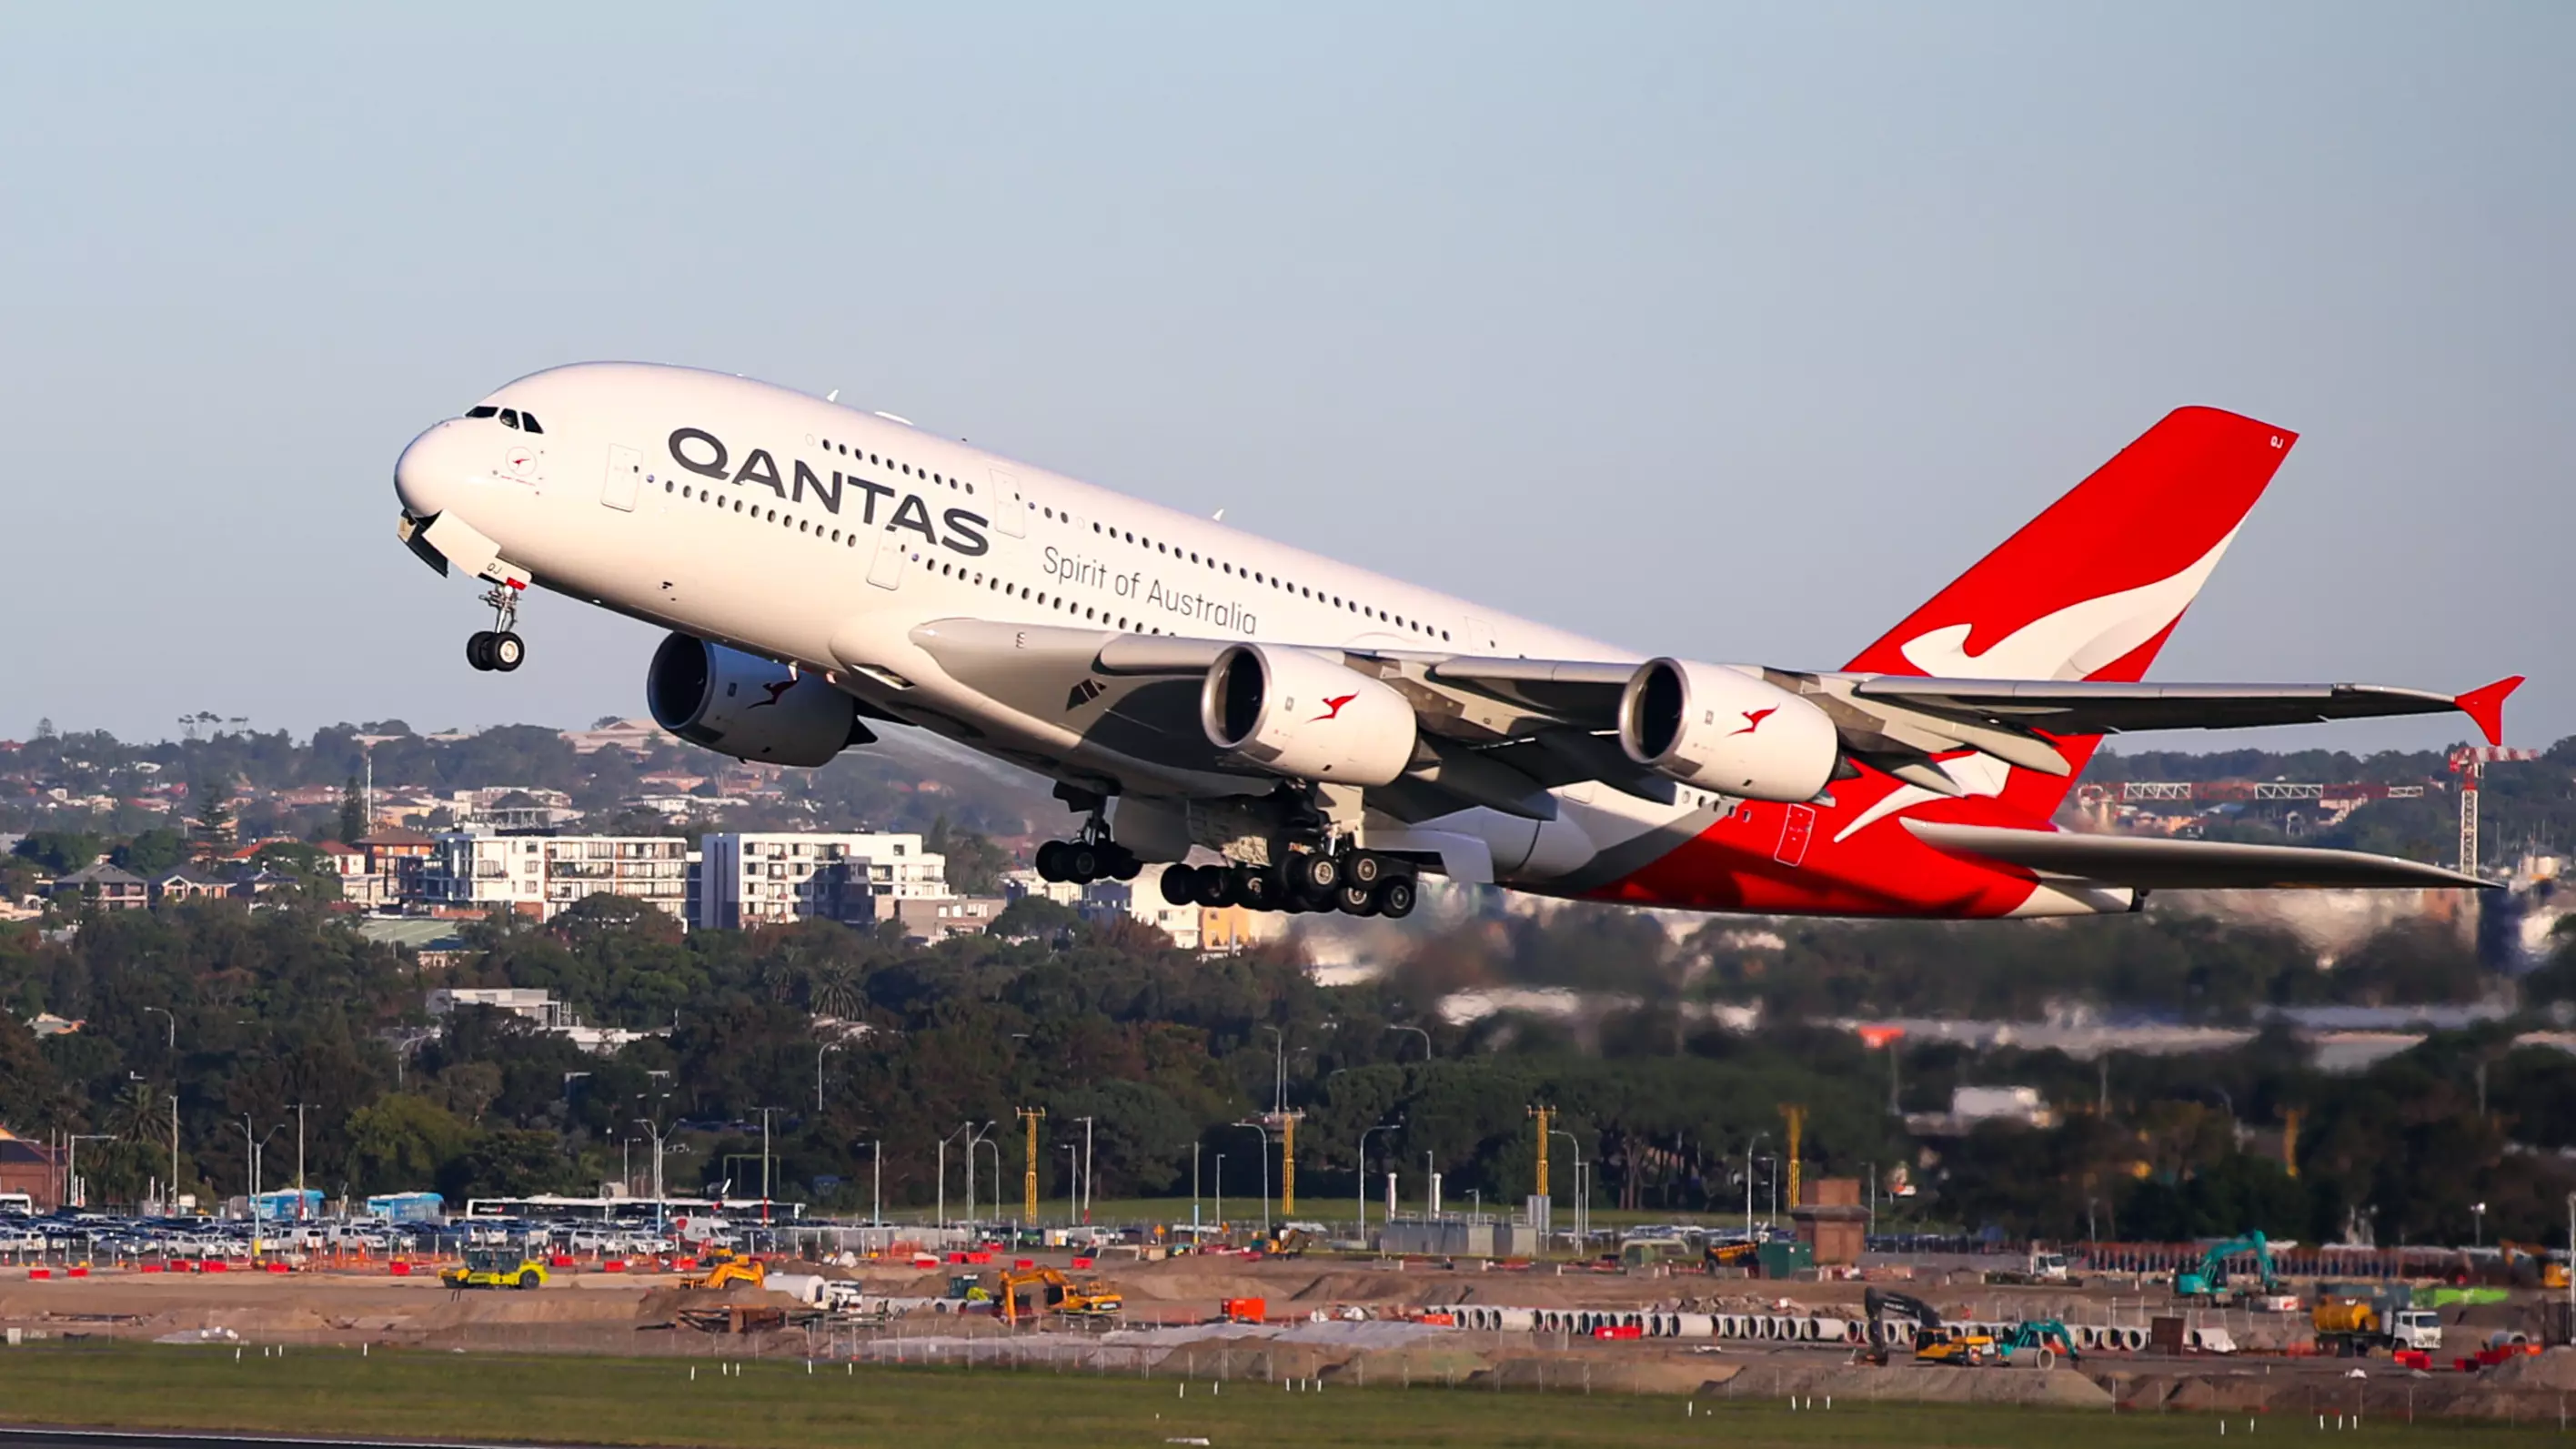 Qantas To Cut 6,000 Jobs And Will Ground 100 Aircraft For One Year